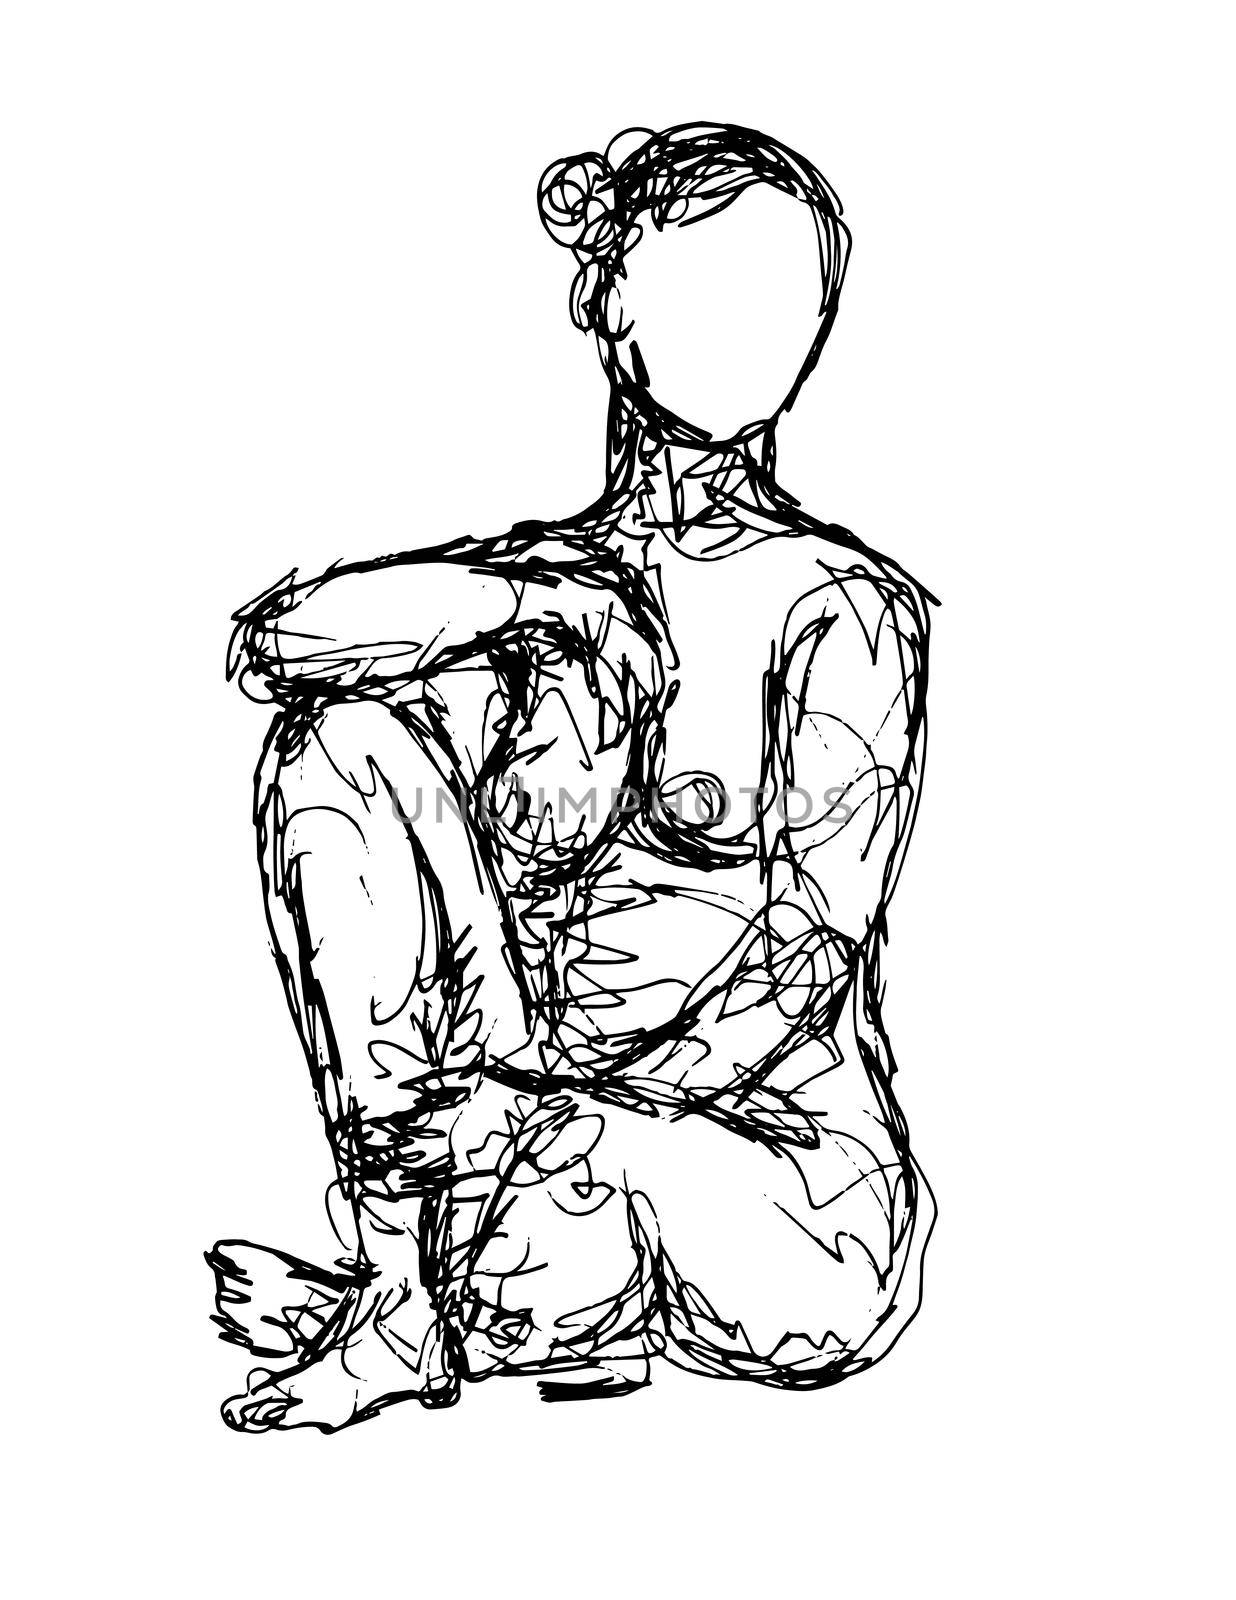 Doodle art illustration of a nude female human figure model seated, hook sitting cross-legged done in continuous line drawing style in black and white on isolated background.